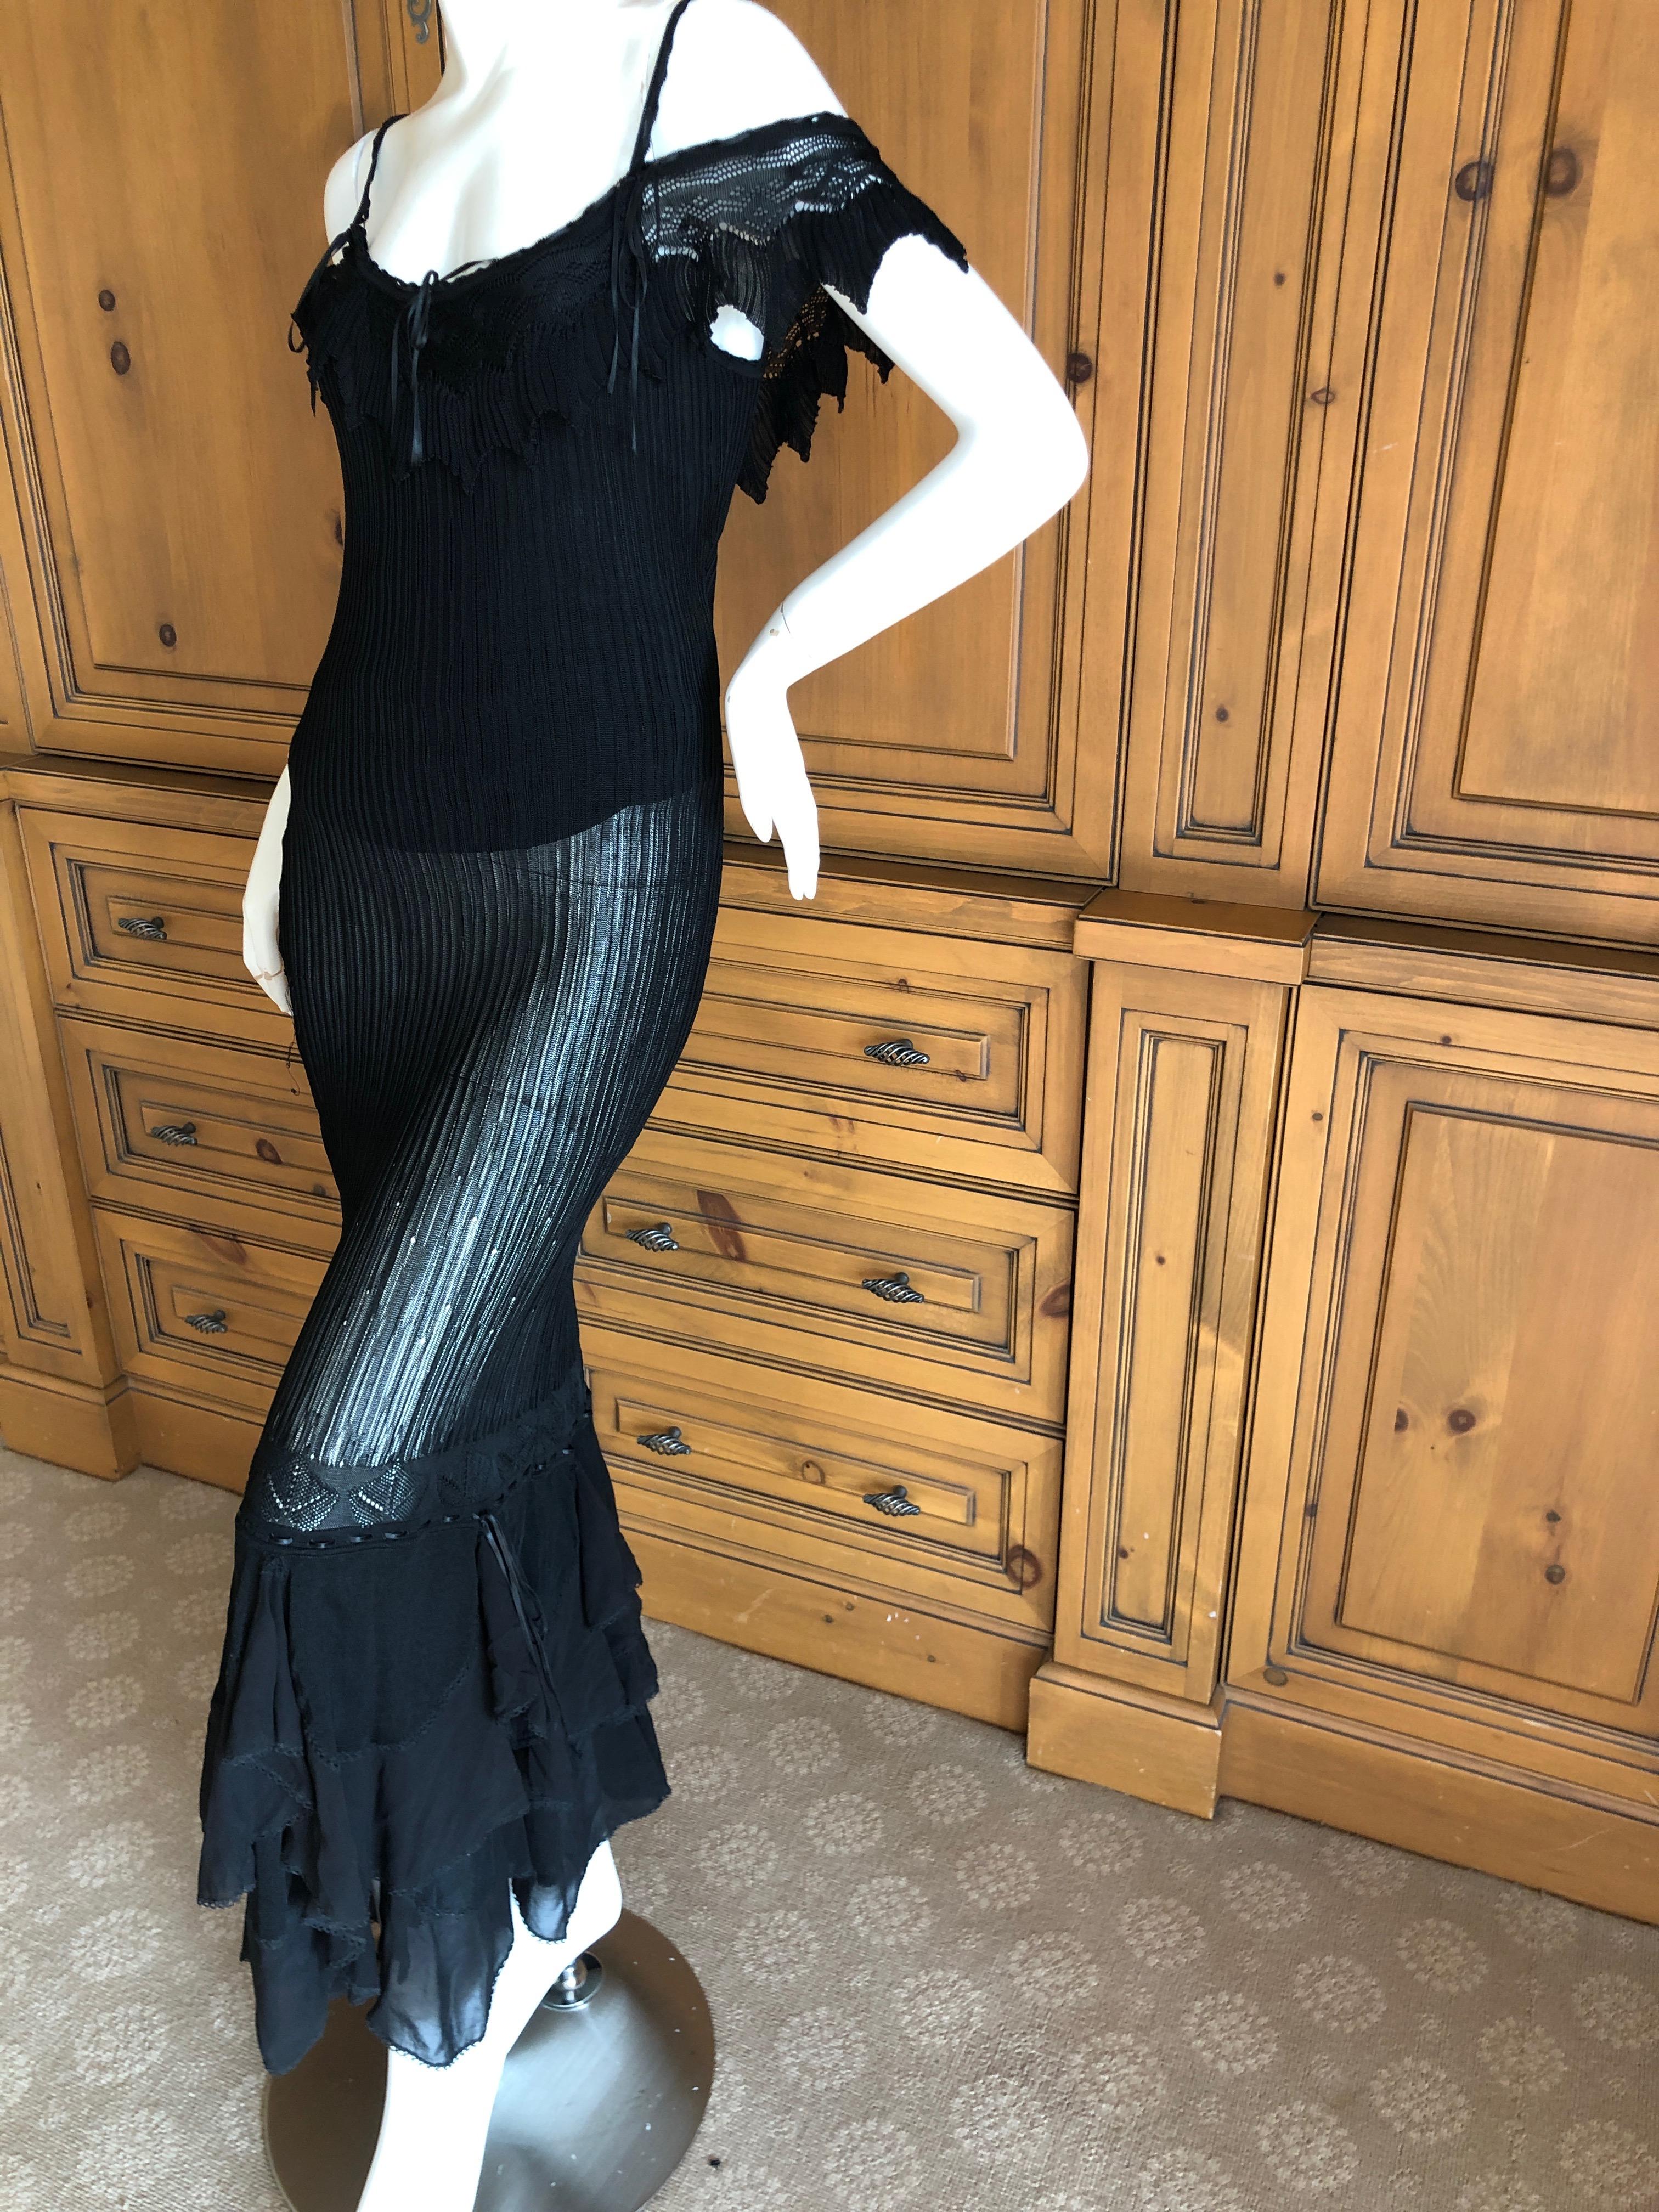  John Galliano Goth Black Semi Sheer Vintage  Ruffled Evening Dress.
Fully lined, I also show it with the lining removed a bit, often my customers wear these sheer with fancy under garments.
N0 size tag App Size 36- 38
 Bust 36